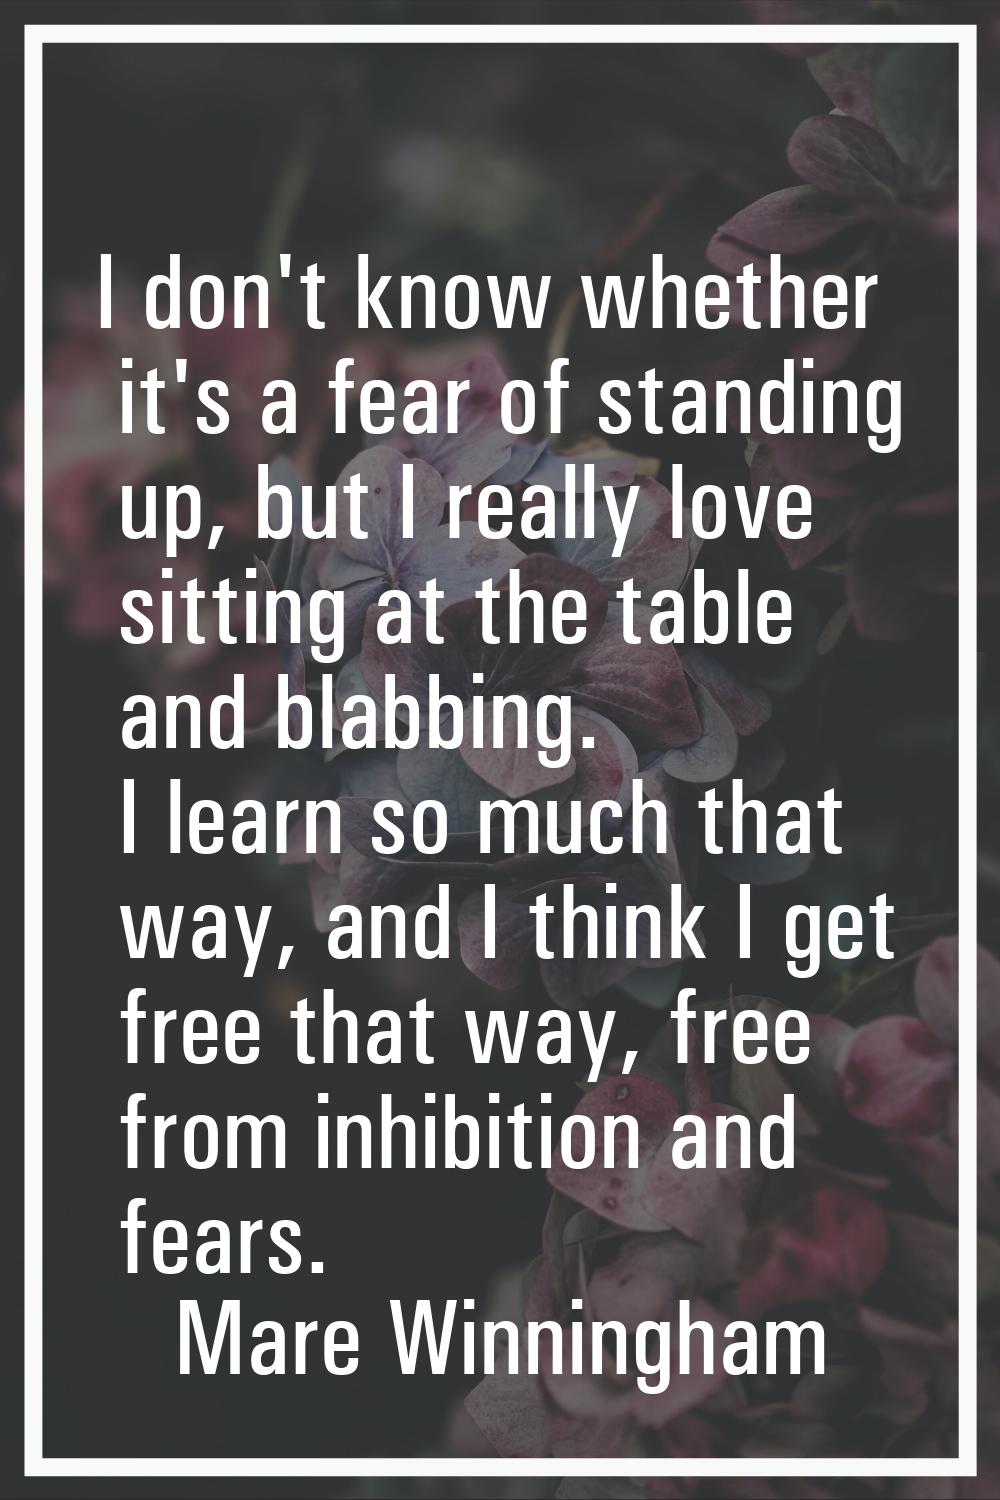 I don't know whether it's a fear of standing up, but I really love sitting at the table and blabbin